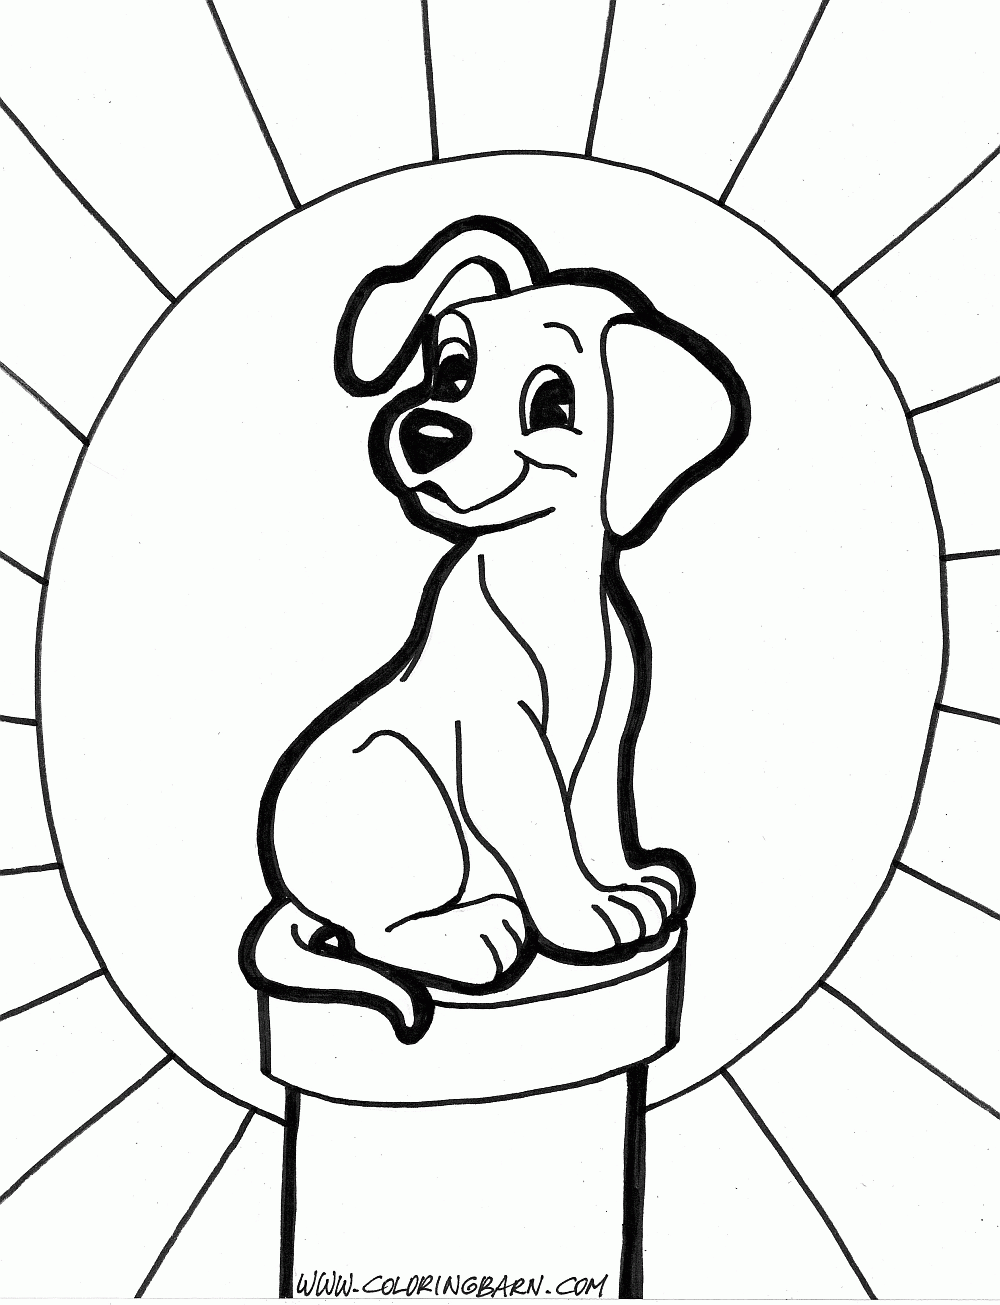 Puppy Color Sheets - Coloring Pages for Kids and for Adults